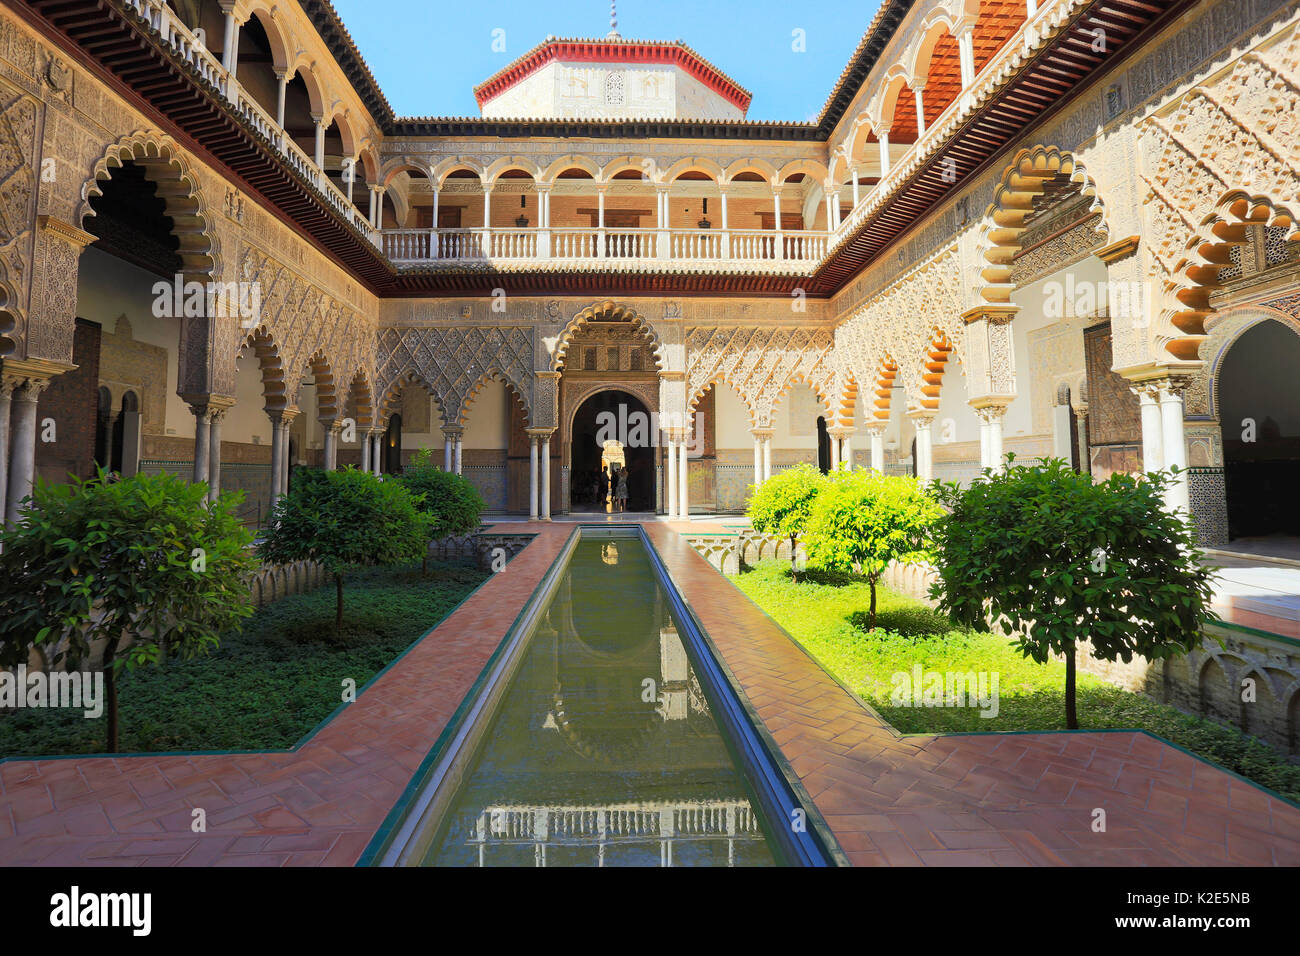 Palace of Alcazar, Famous Andalusian Architecture. Old Arab Palace in Seville, Spain. Moorish Ornamented Arches, fountain and Columns Stock Photo